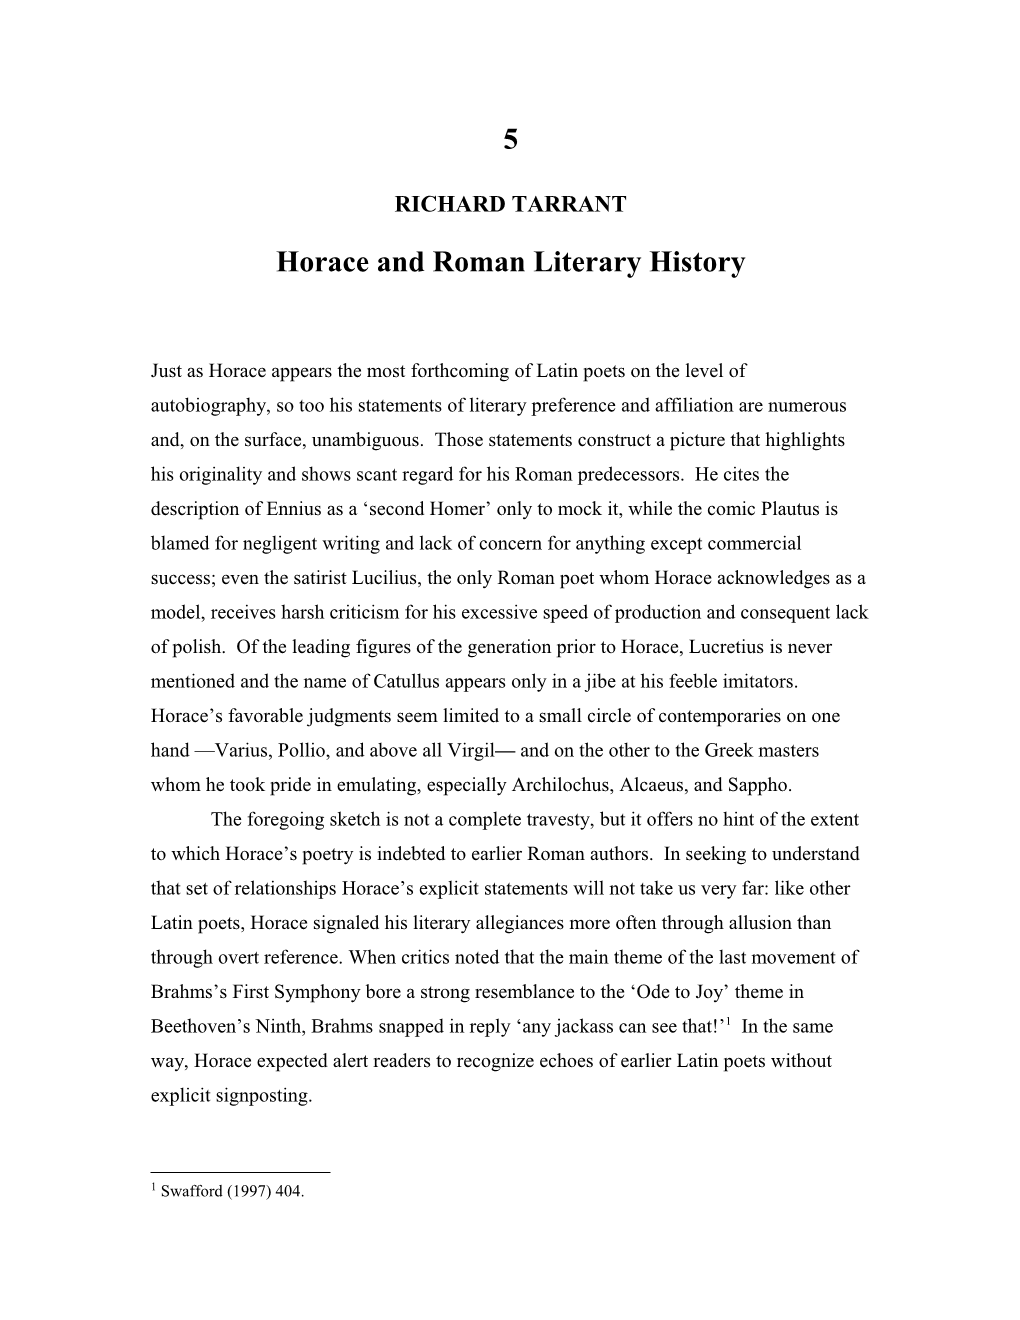 Horace and Roman Literary History